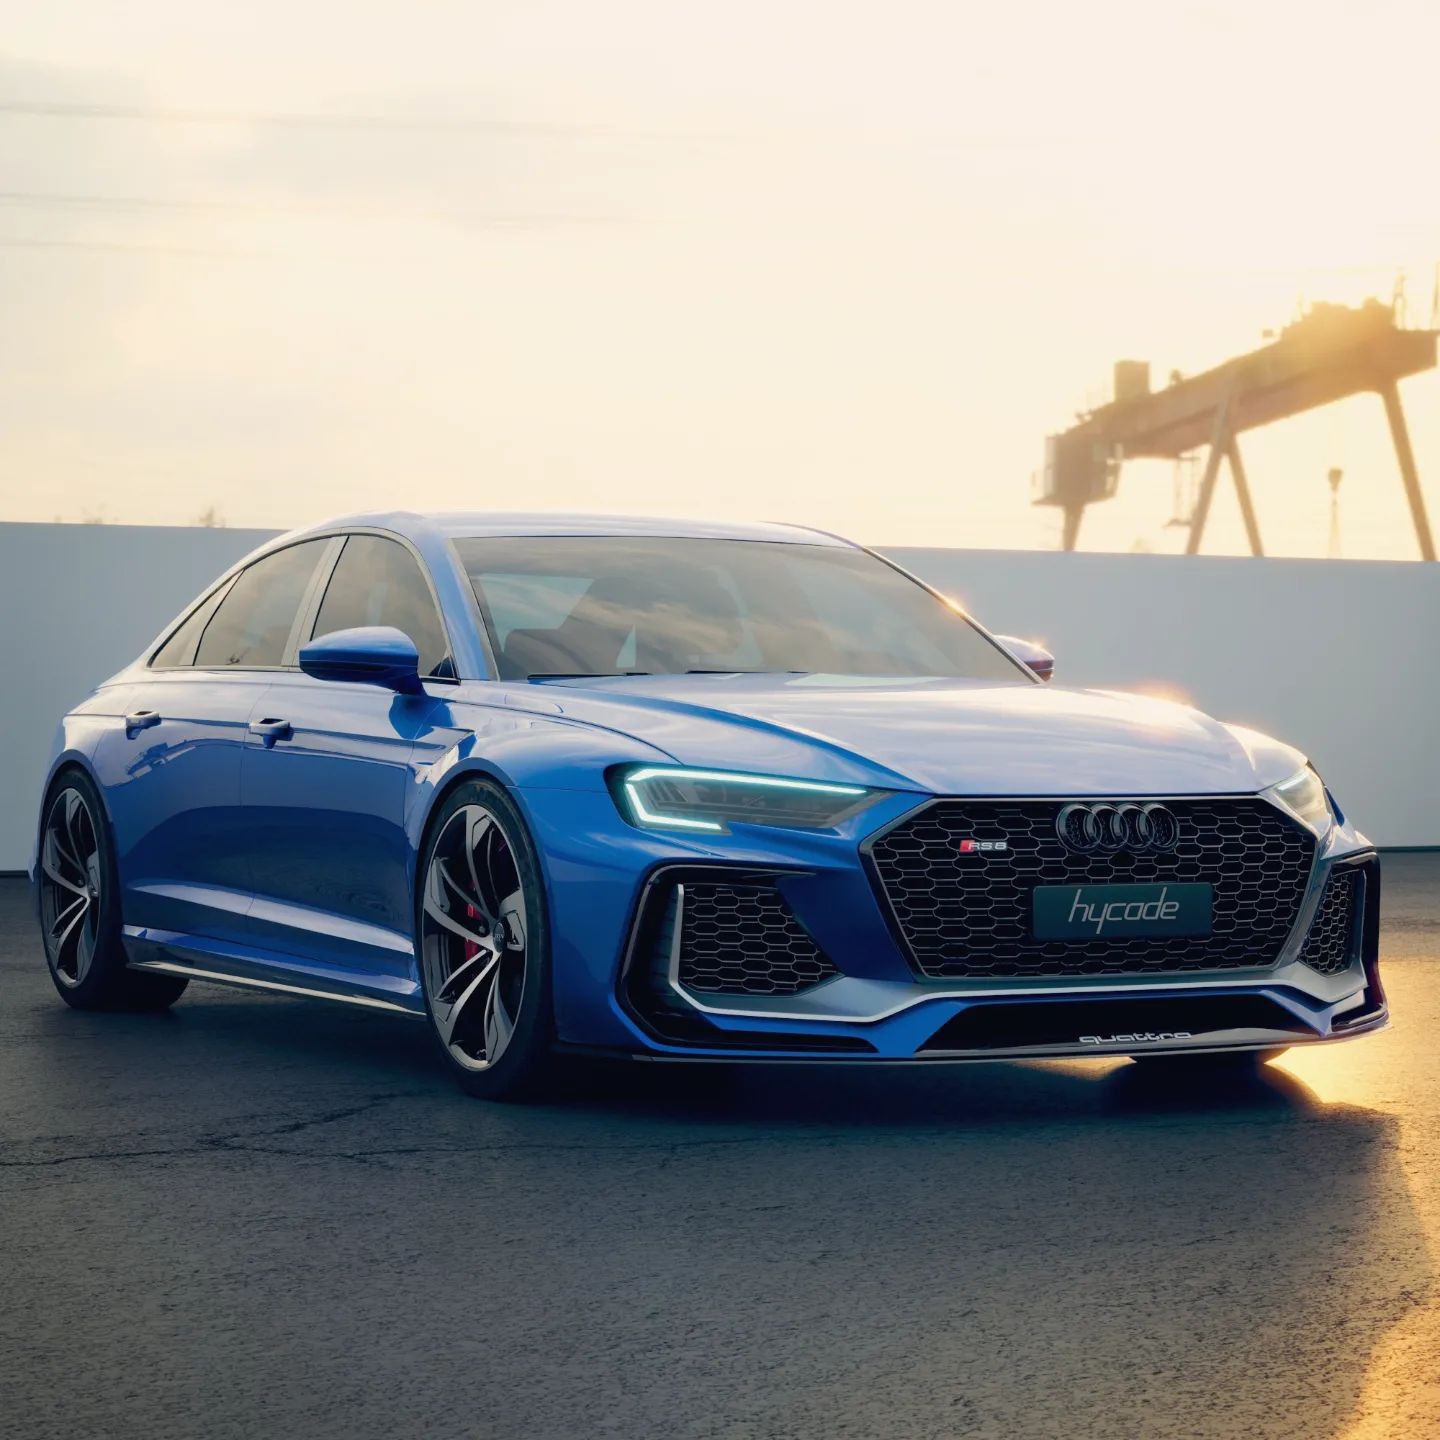 FirstEver Audi RS 8 Would Target Businessmen With a Thing for Racing